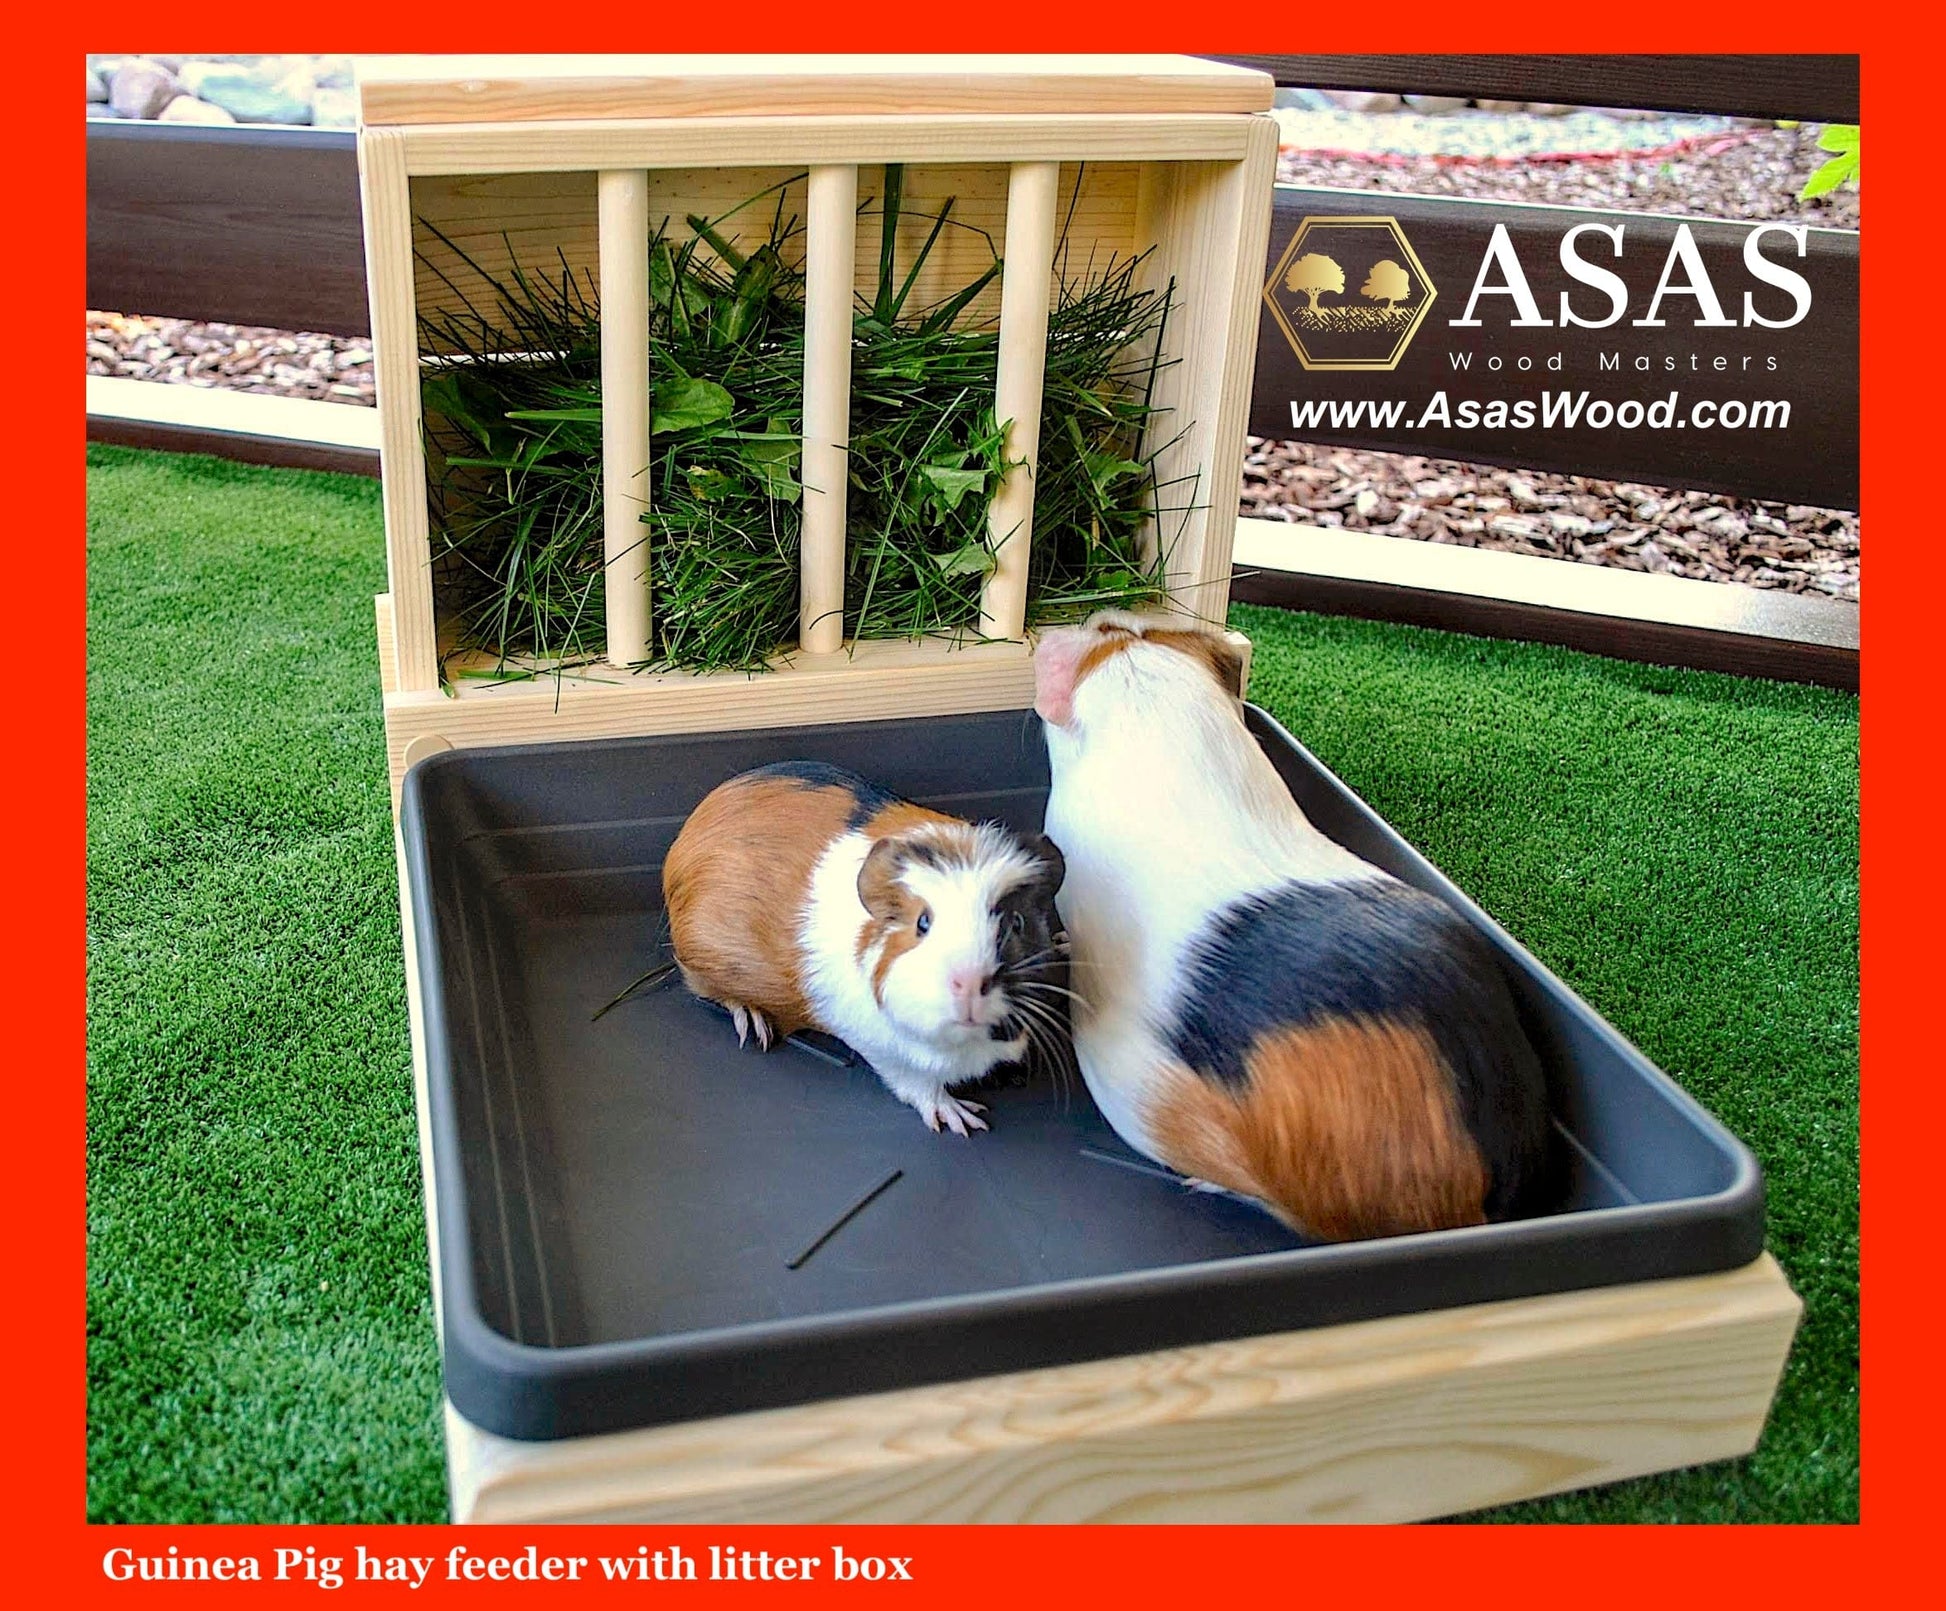 Guinea pig hay feeder with litter box and two cute guinea pigs